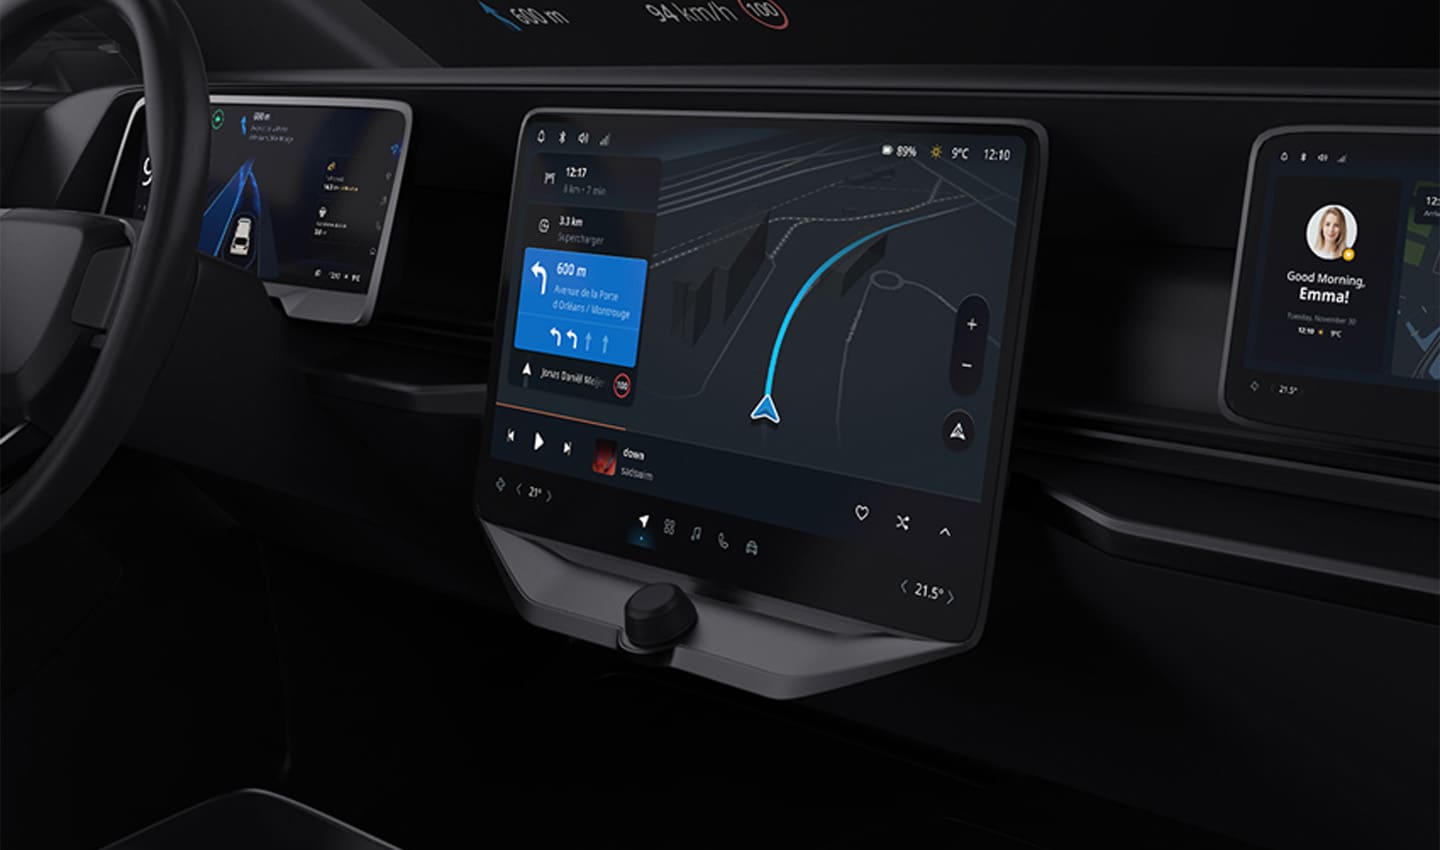 TomTom IndiGO was designed to allow carmakers to customize the user experience and make it reminiscent of their brand.